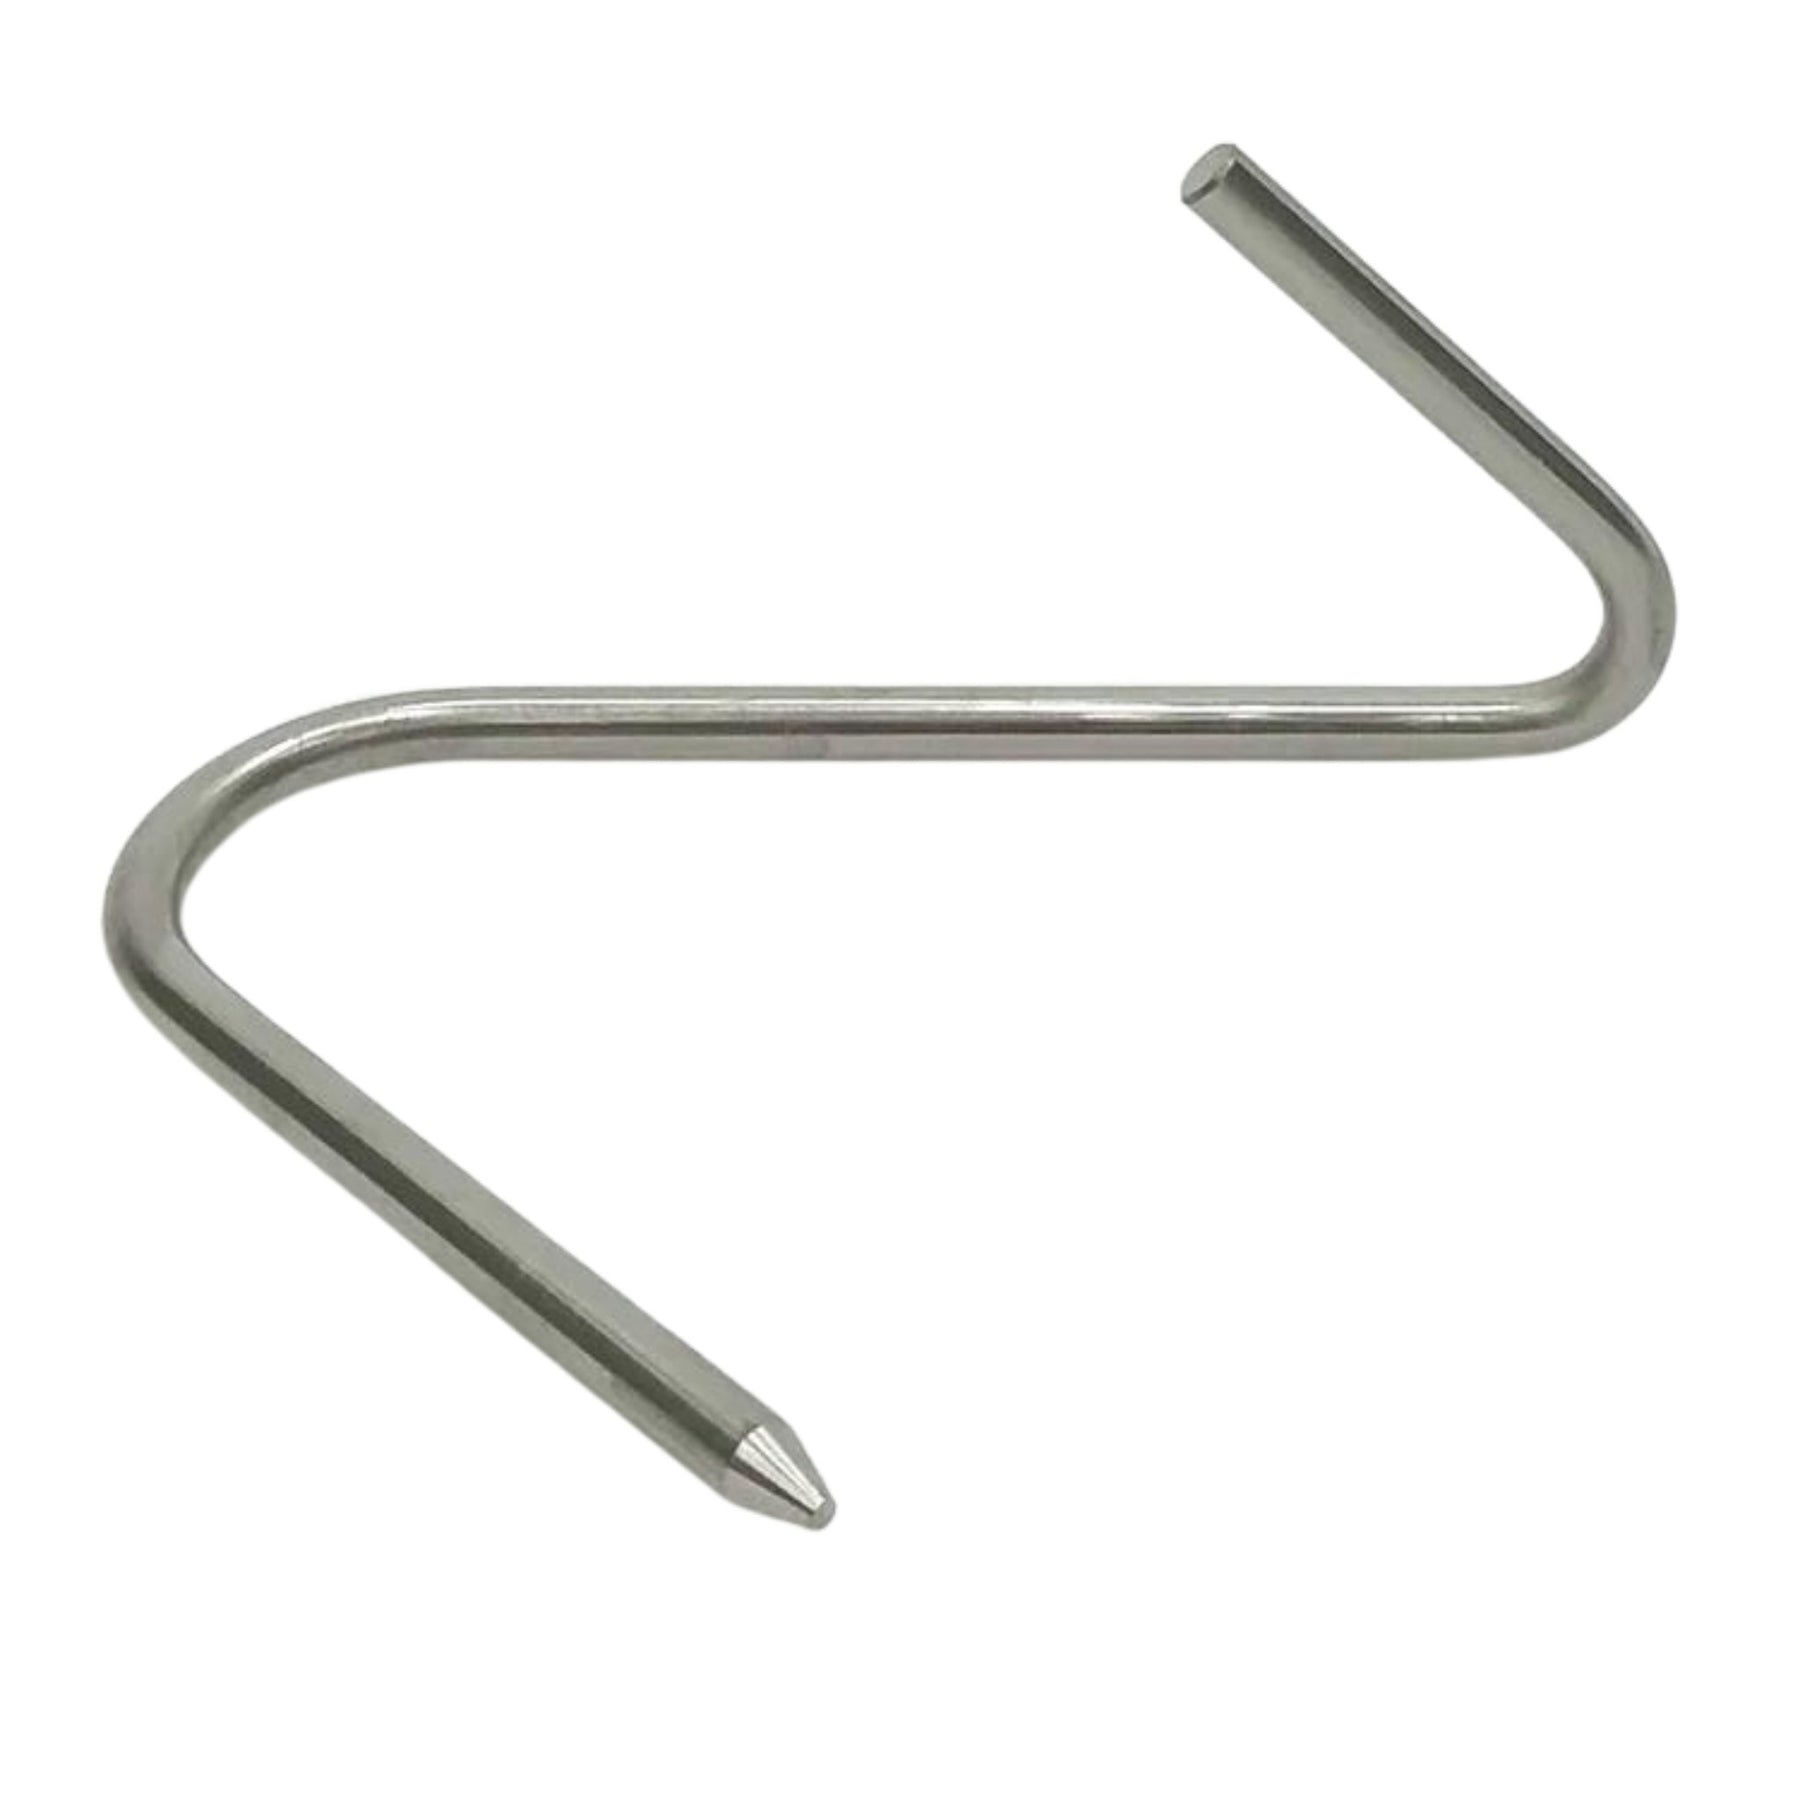 Pack of 10 Meat Hooks, Butcher's Hooks, Stainless Steel Hooks, S-Hooks,  Smoking Hooks, Food Hooks, D4.0 x 100 mm Pack of 10